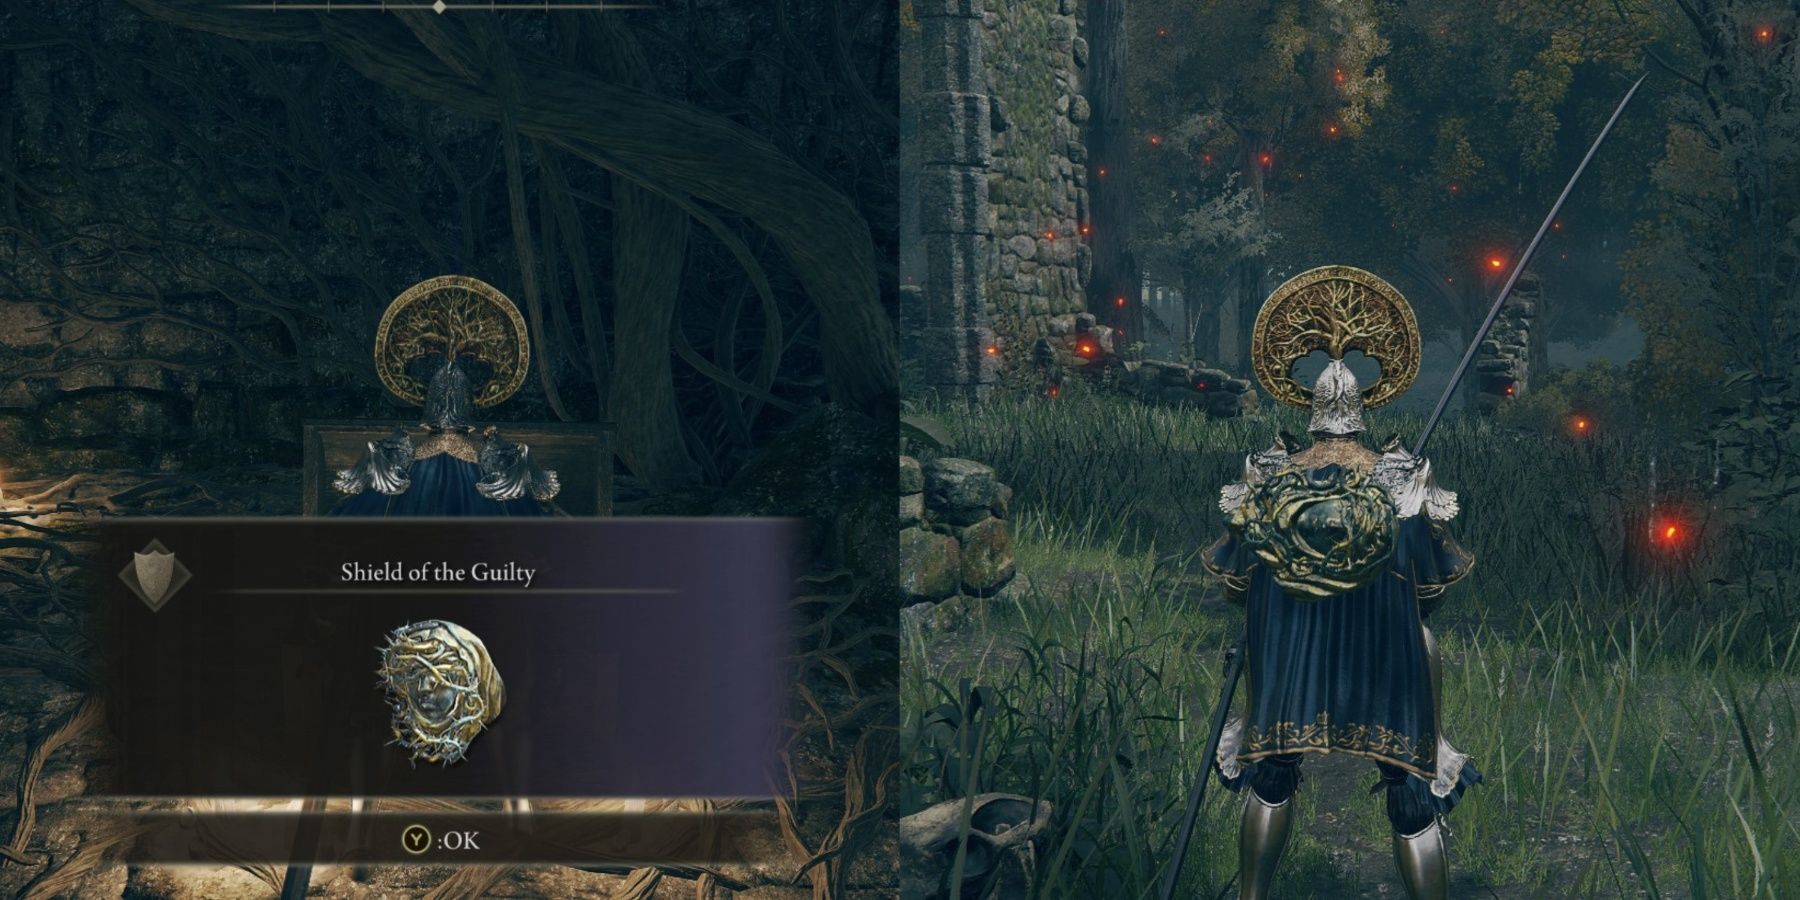 Elden Ring - Shield of the Guilty location guide